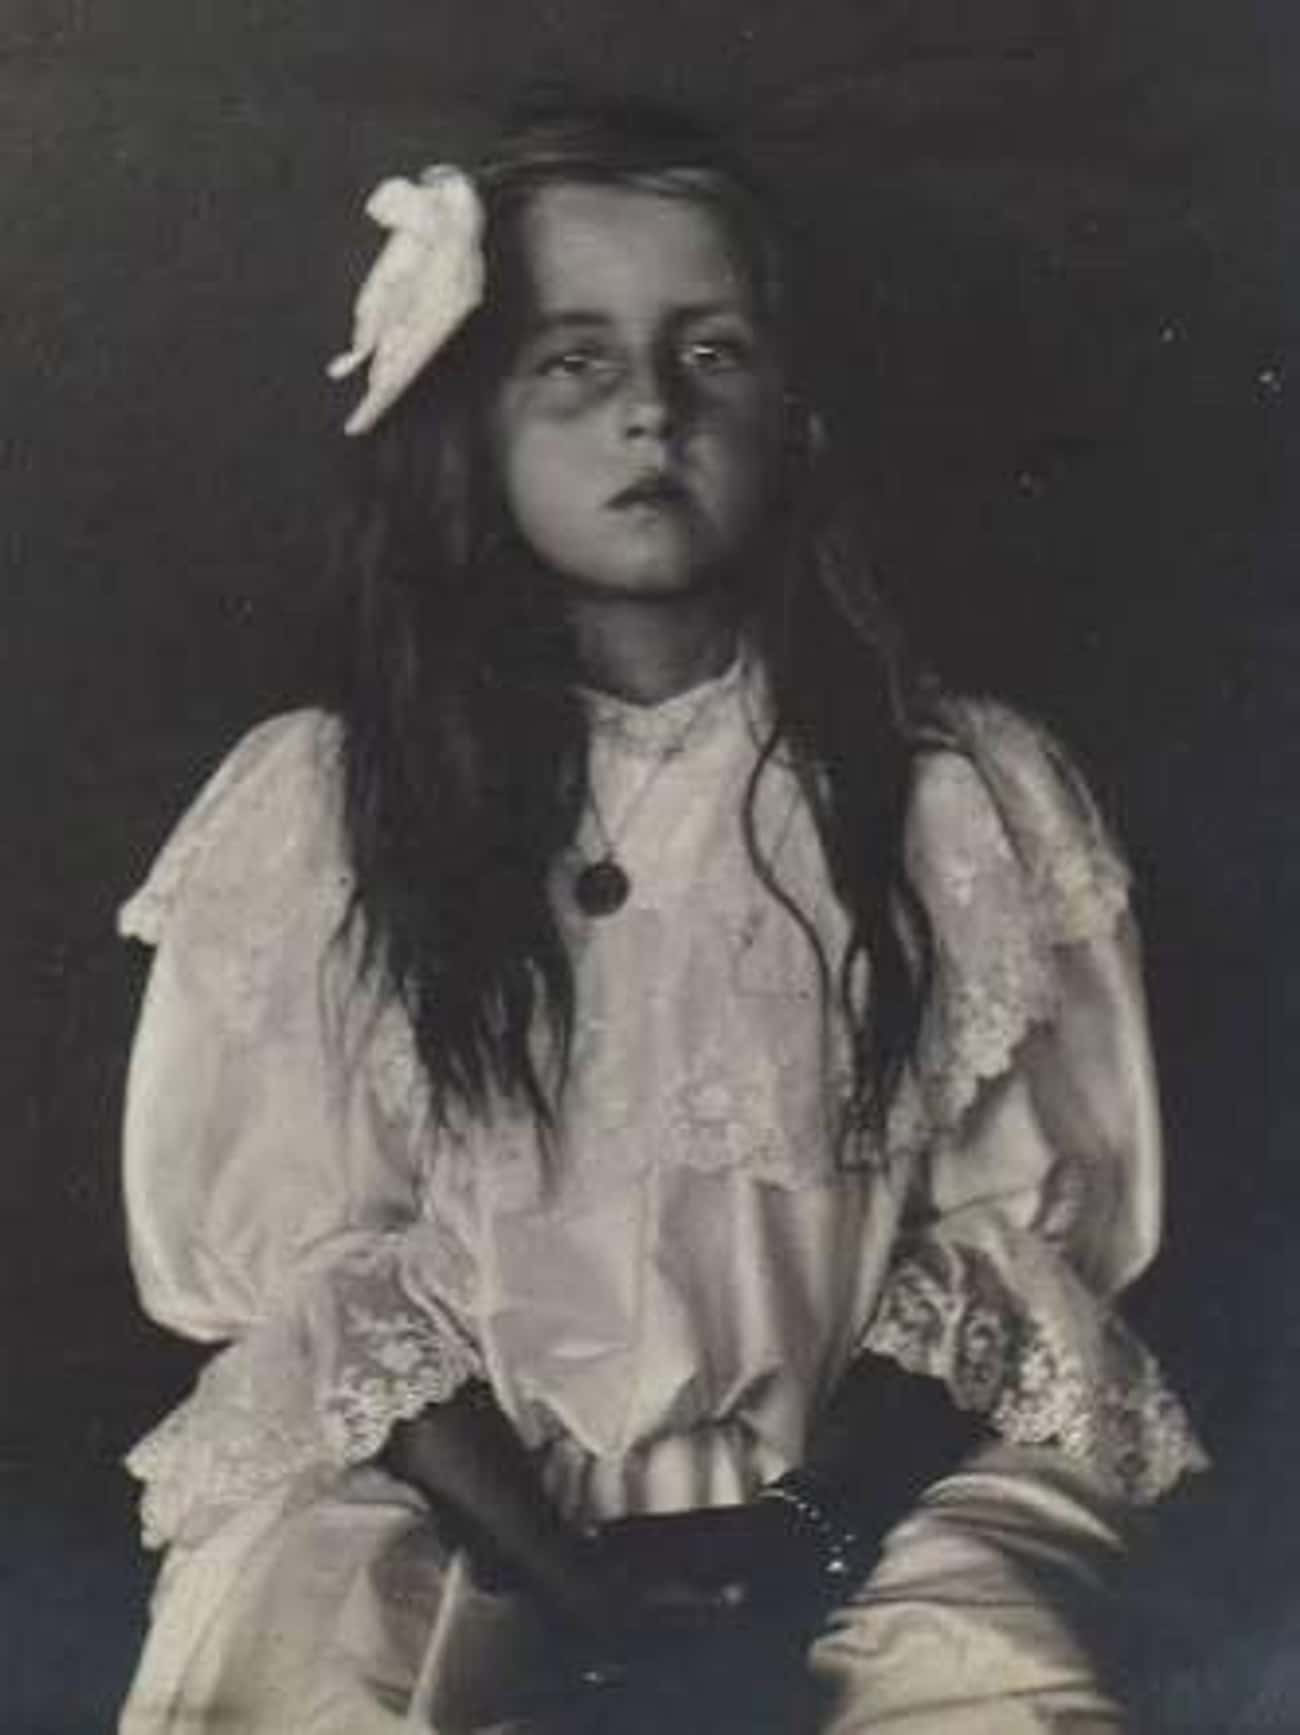 Post Mortem Girl With Open Eyes - Date Unknown